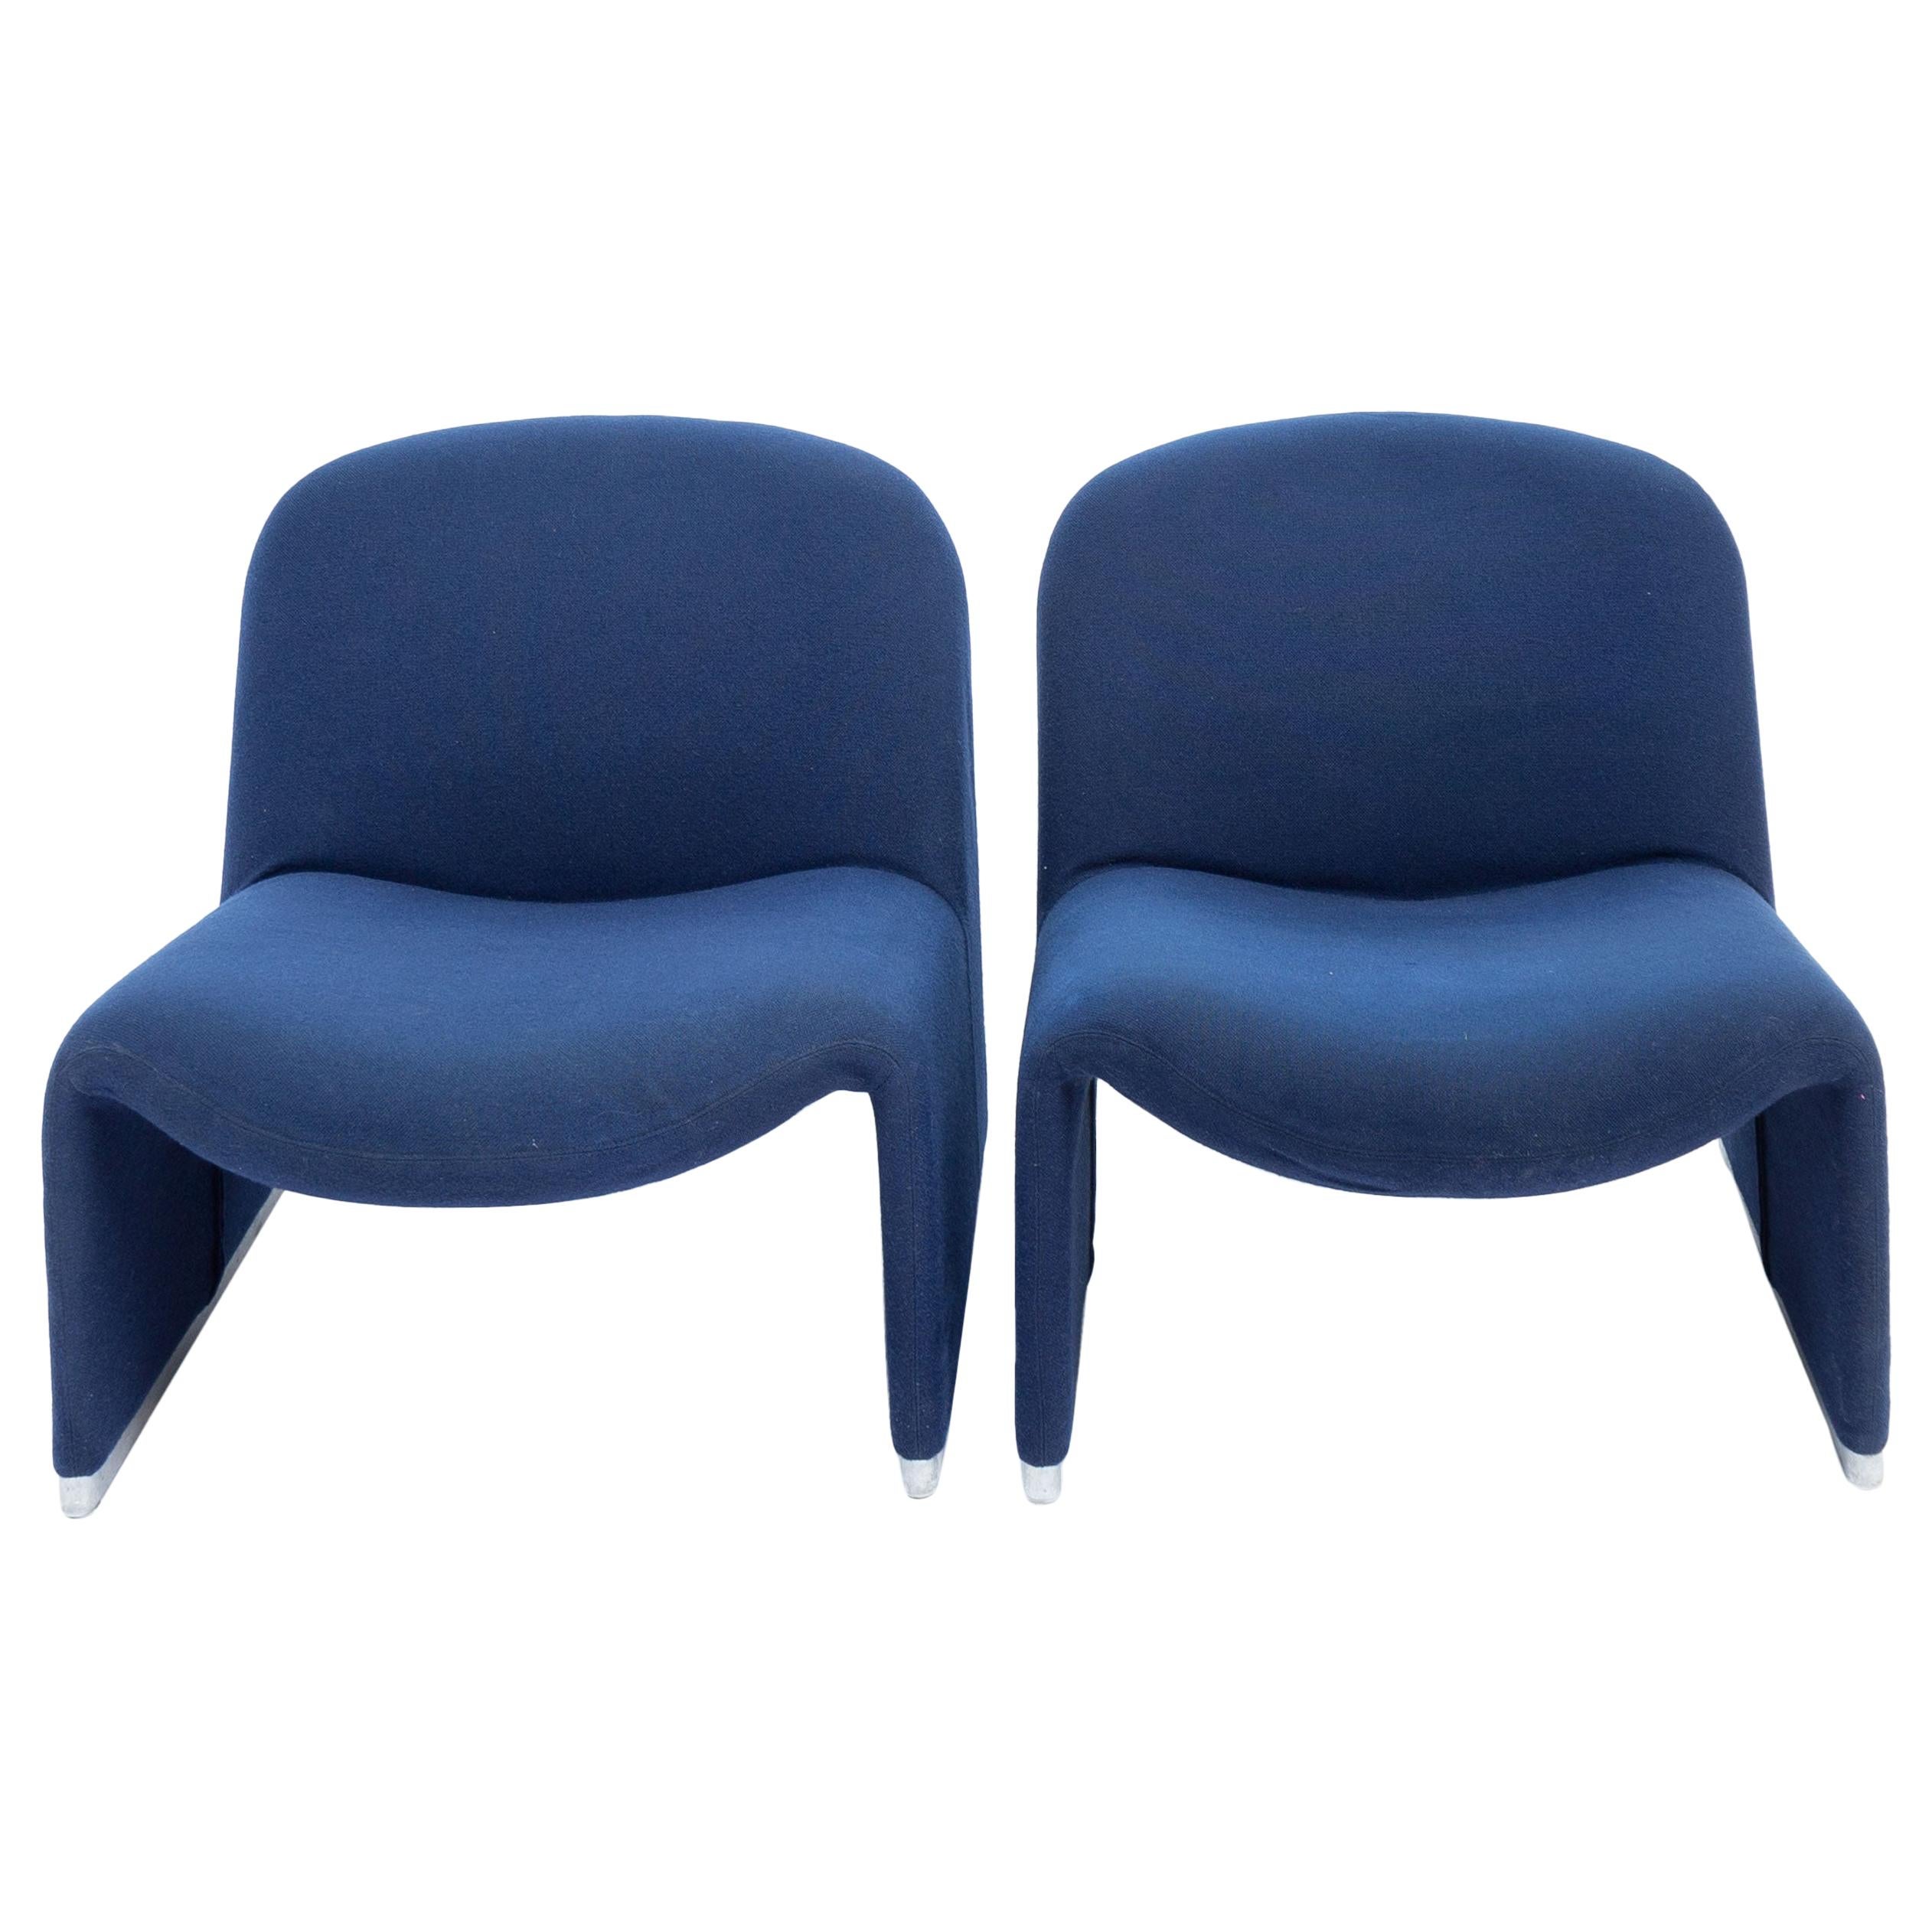 Alky Chair Blue Designed by Giancarlo Piretti for Castelli, Italy, 1970s